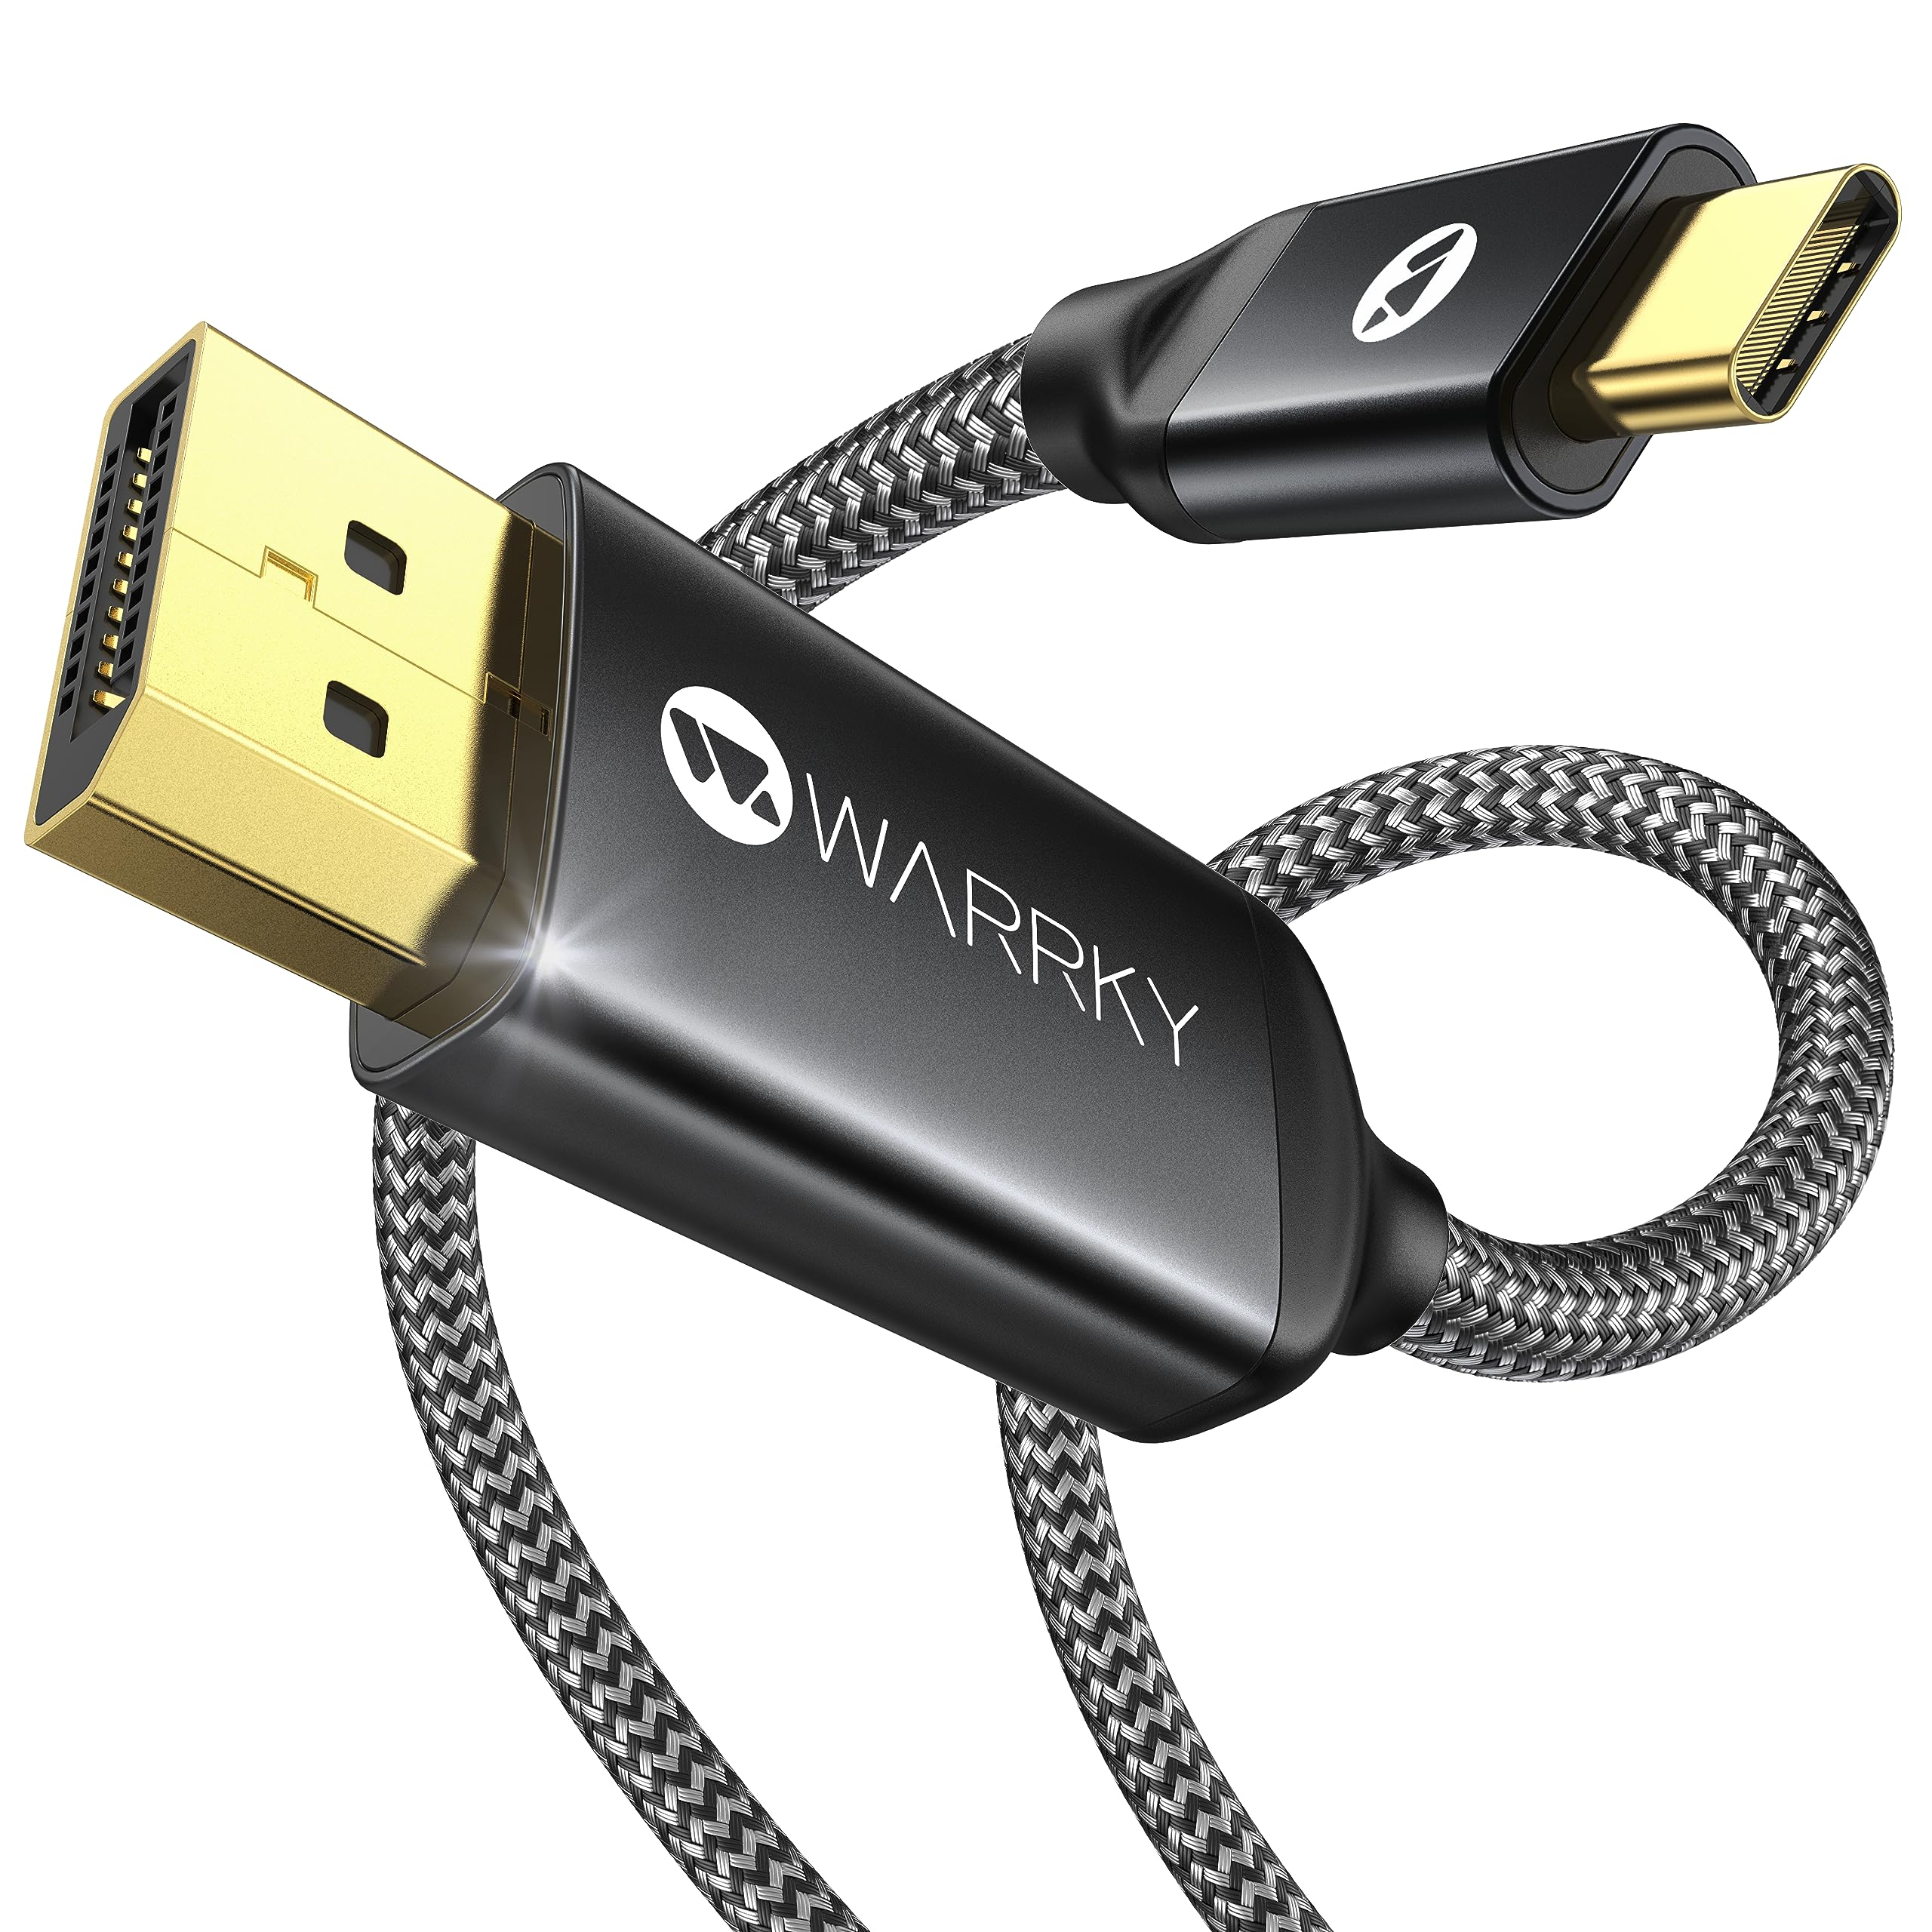 Warrky USB C to HDMI Cable 4K, 3.3ft [Braided, High Speed] Thunderbolt 3 to  HDMI Adapter Compatible for New iPad, MacBook Pro/Air, iMac, Galaxy S20